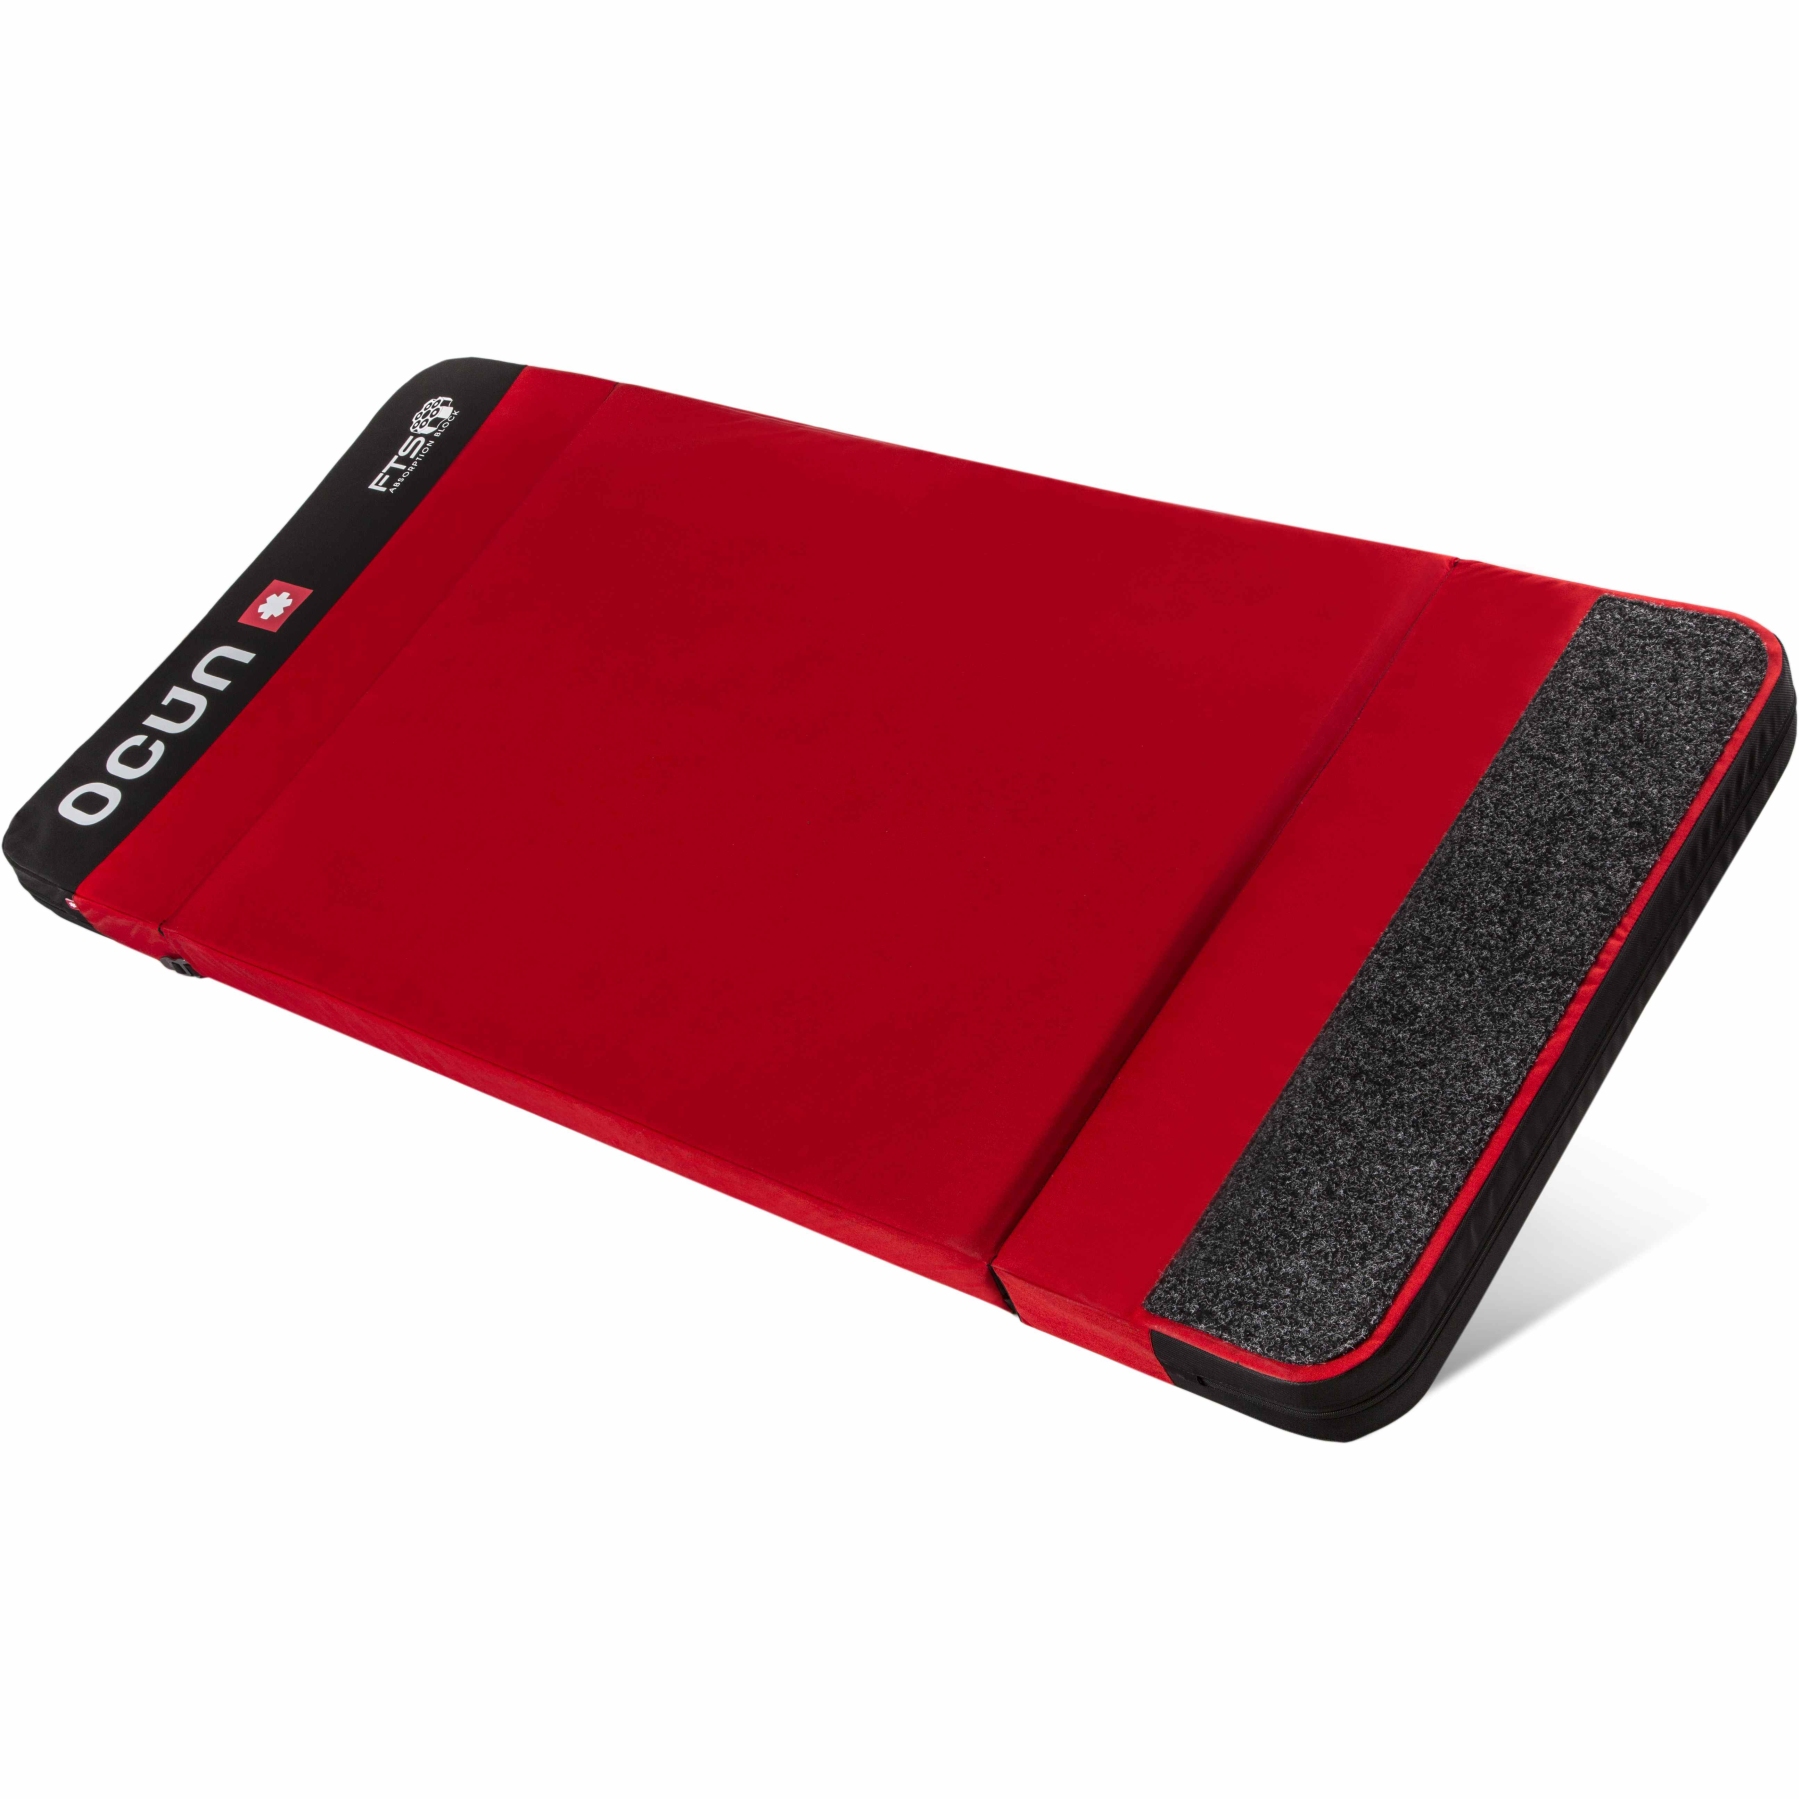 Picture of Ocún Incubator FTS Crashpad - red